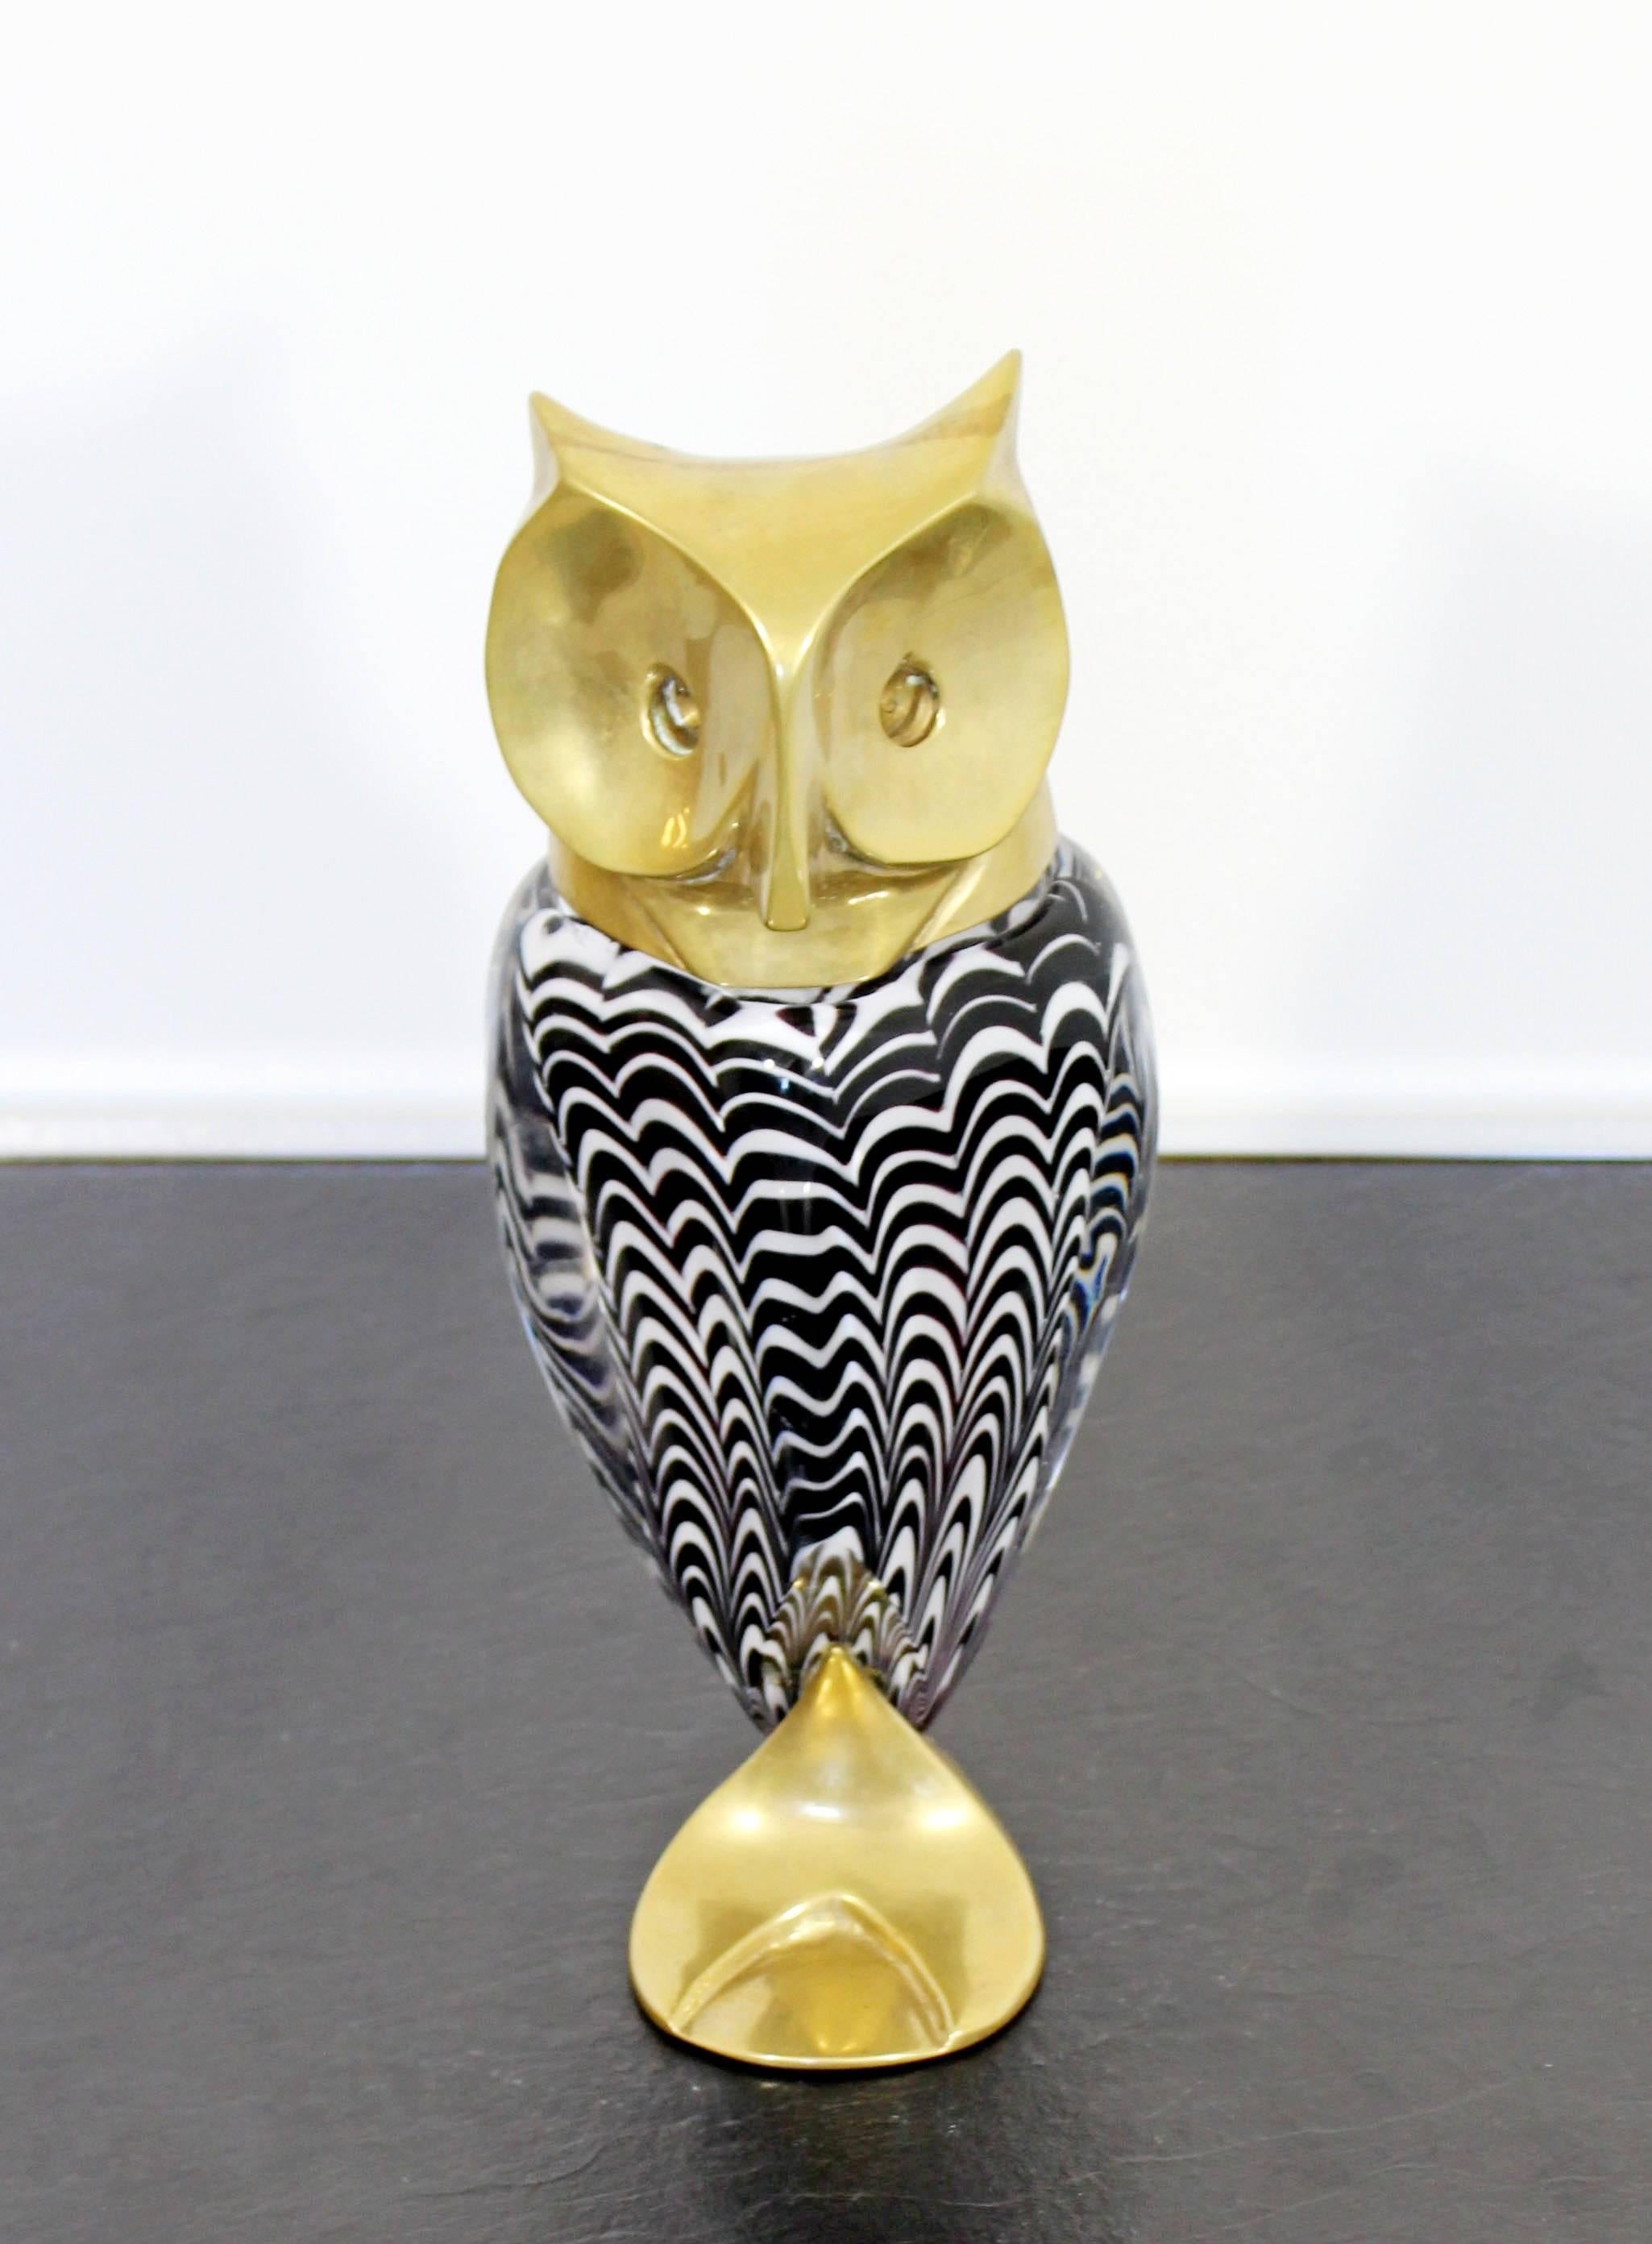 For your consideration is a phenomenal, glass and brass bronze table sculpture of an owl, designed by Luca Bojola, made in Italy. In excellent condition. The dimensions are 4.5